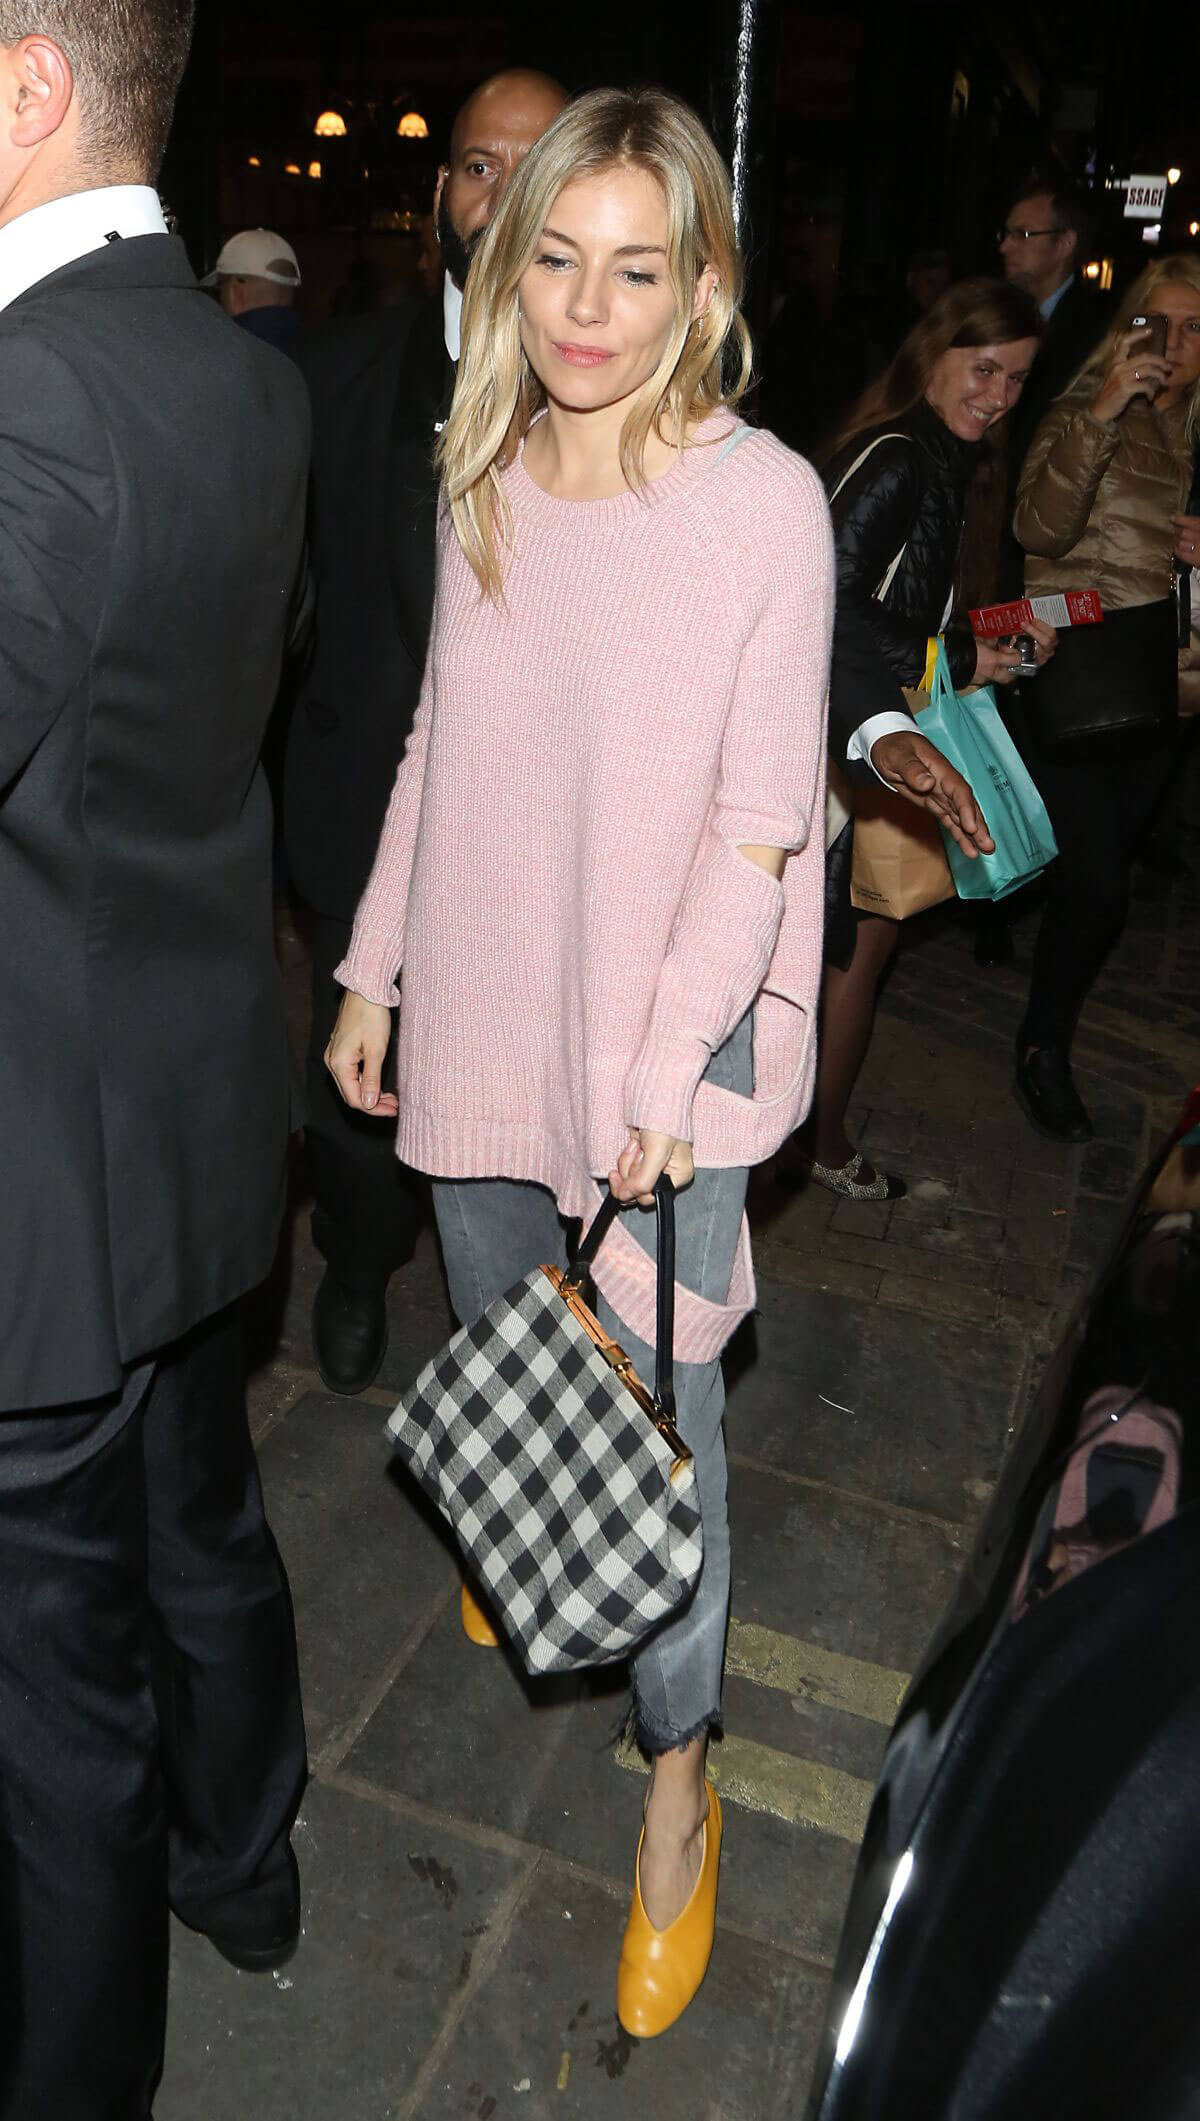 Sienna Miller wears Stylish Pink Sweatshirt Out and About in London